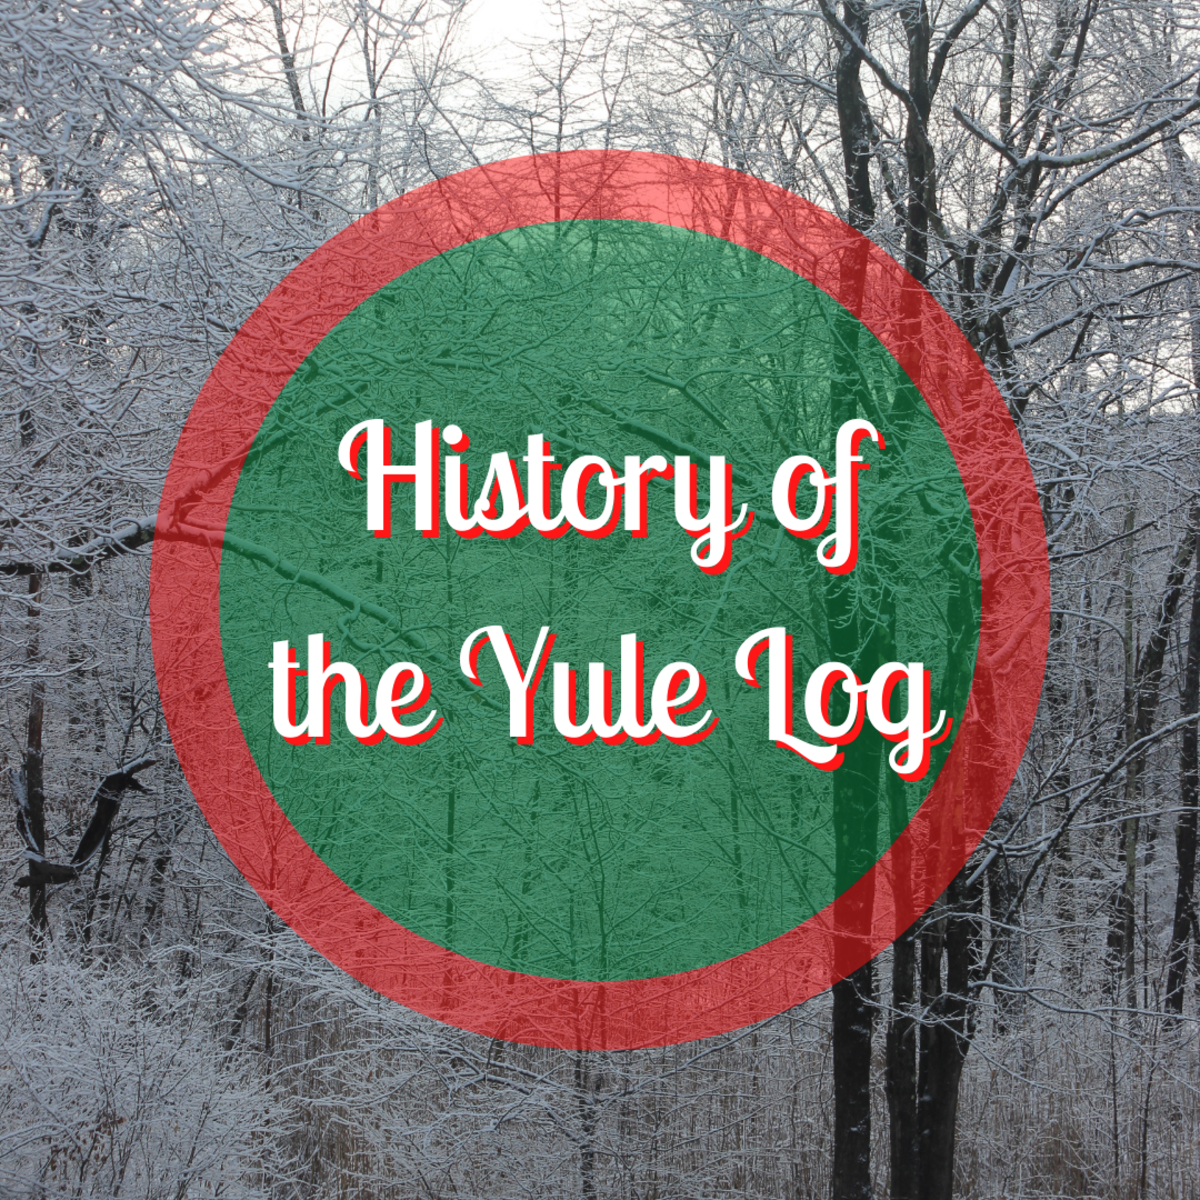 Ever eaten chocolate sponge cake on Christmas that resembled a log? That's a Yule Log! The Yule Log was originally an actual log cut from a tree. Some people still burn these during Christmas. Learn about the Yule Log's origins and modern existence!